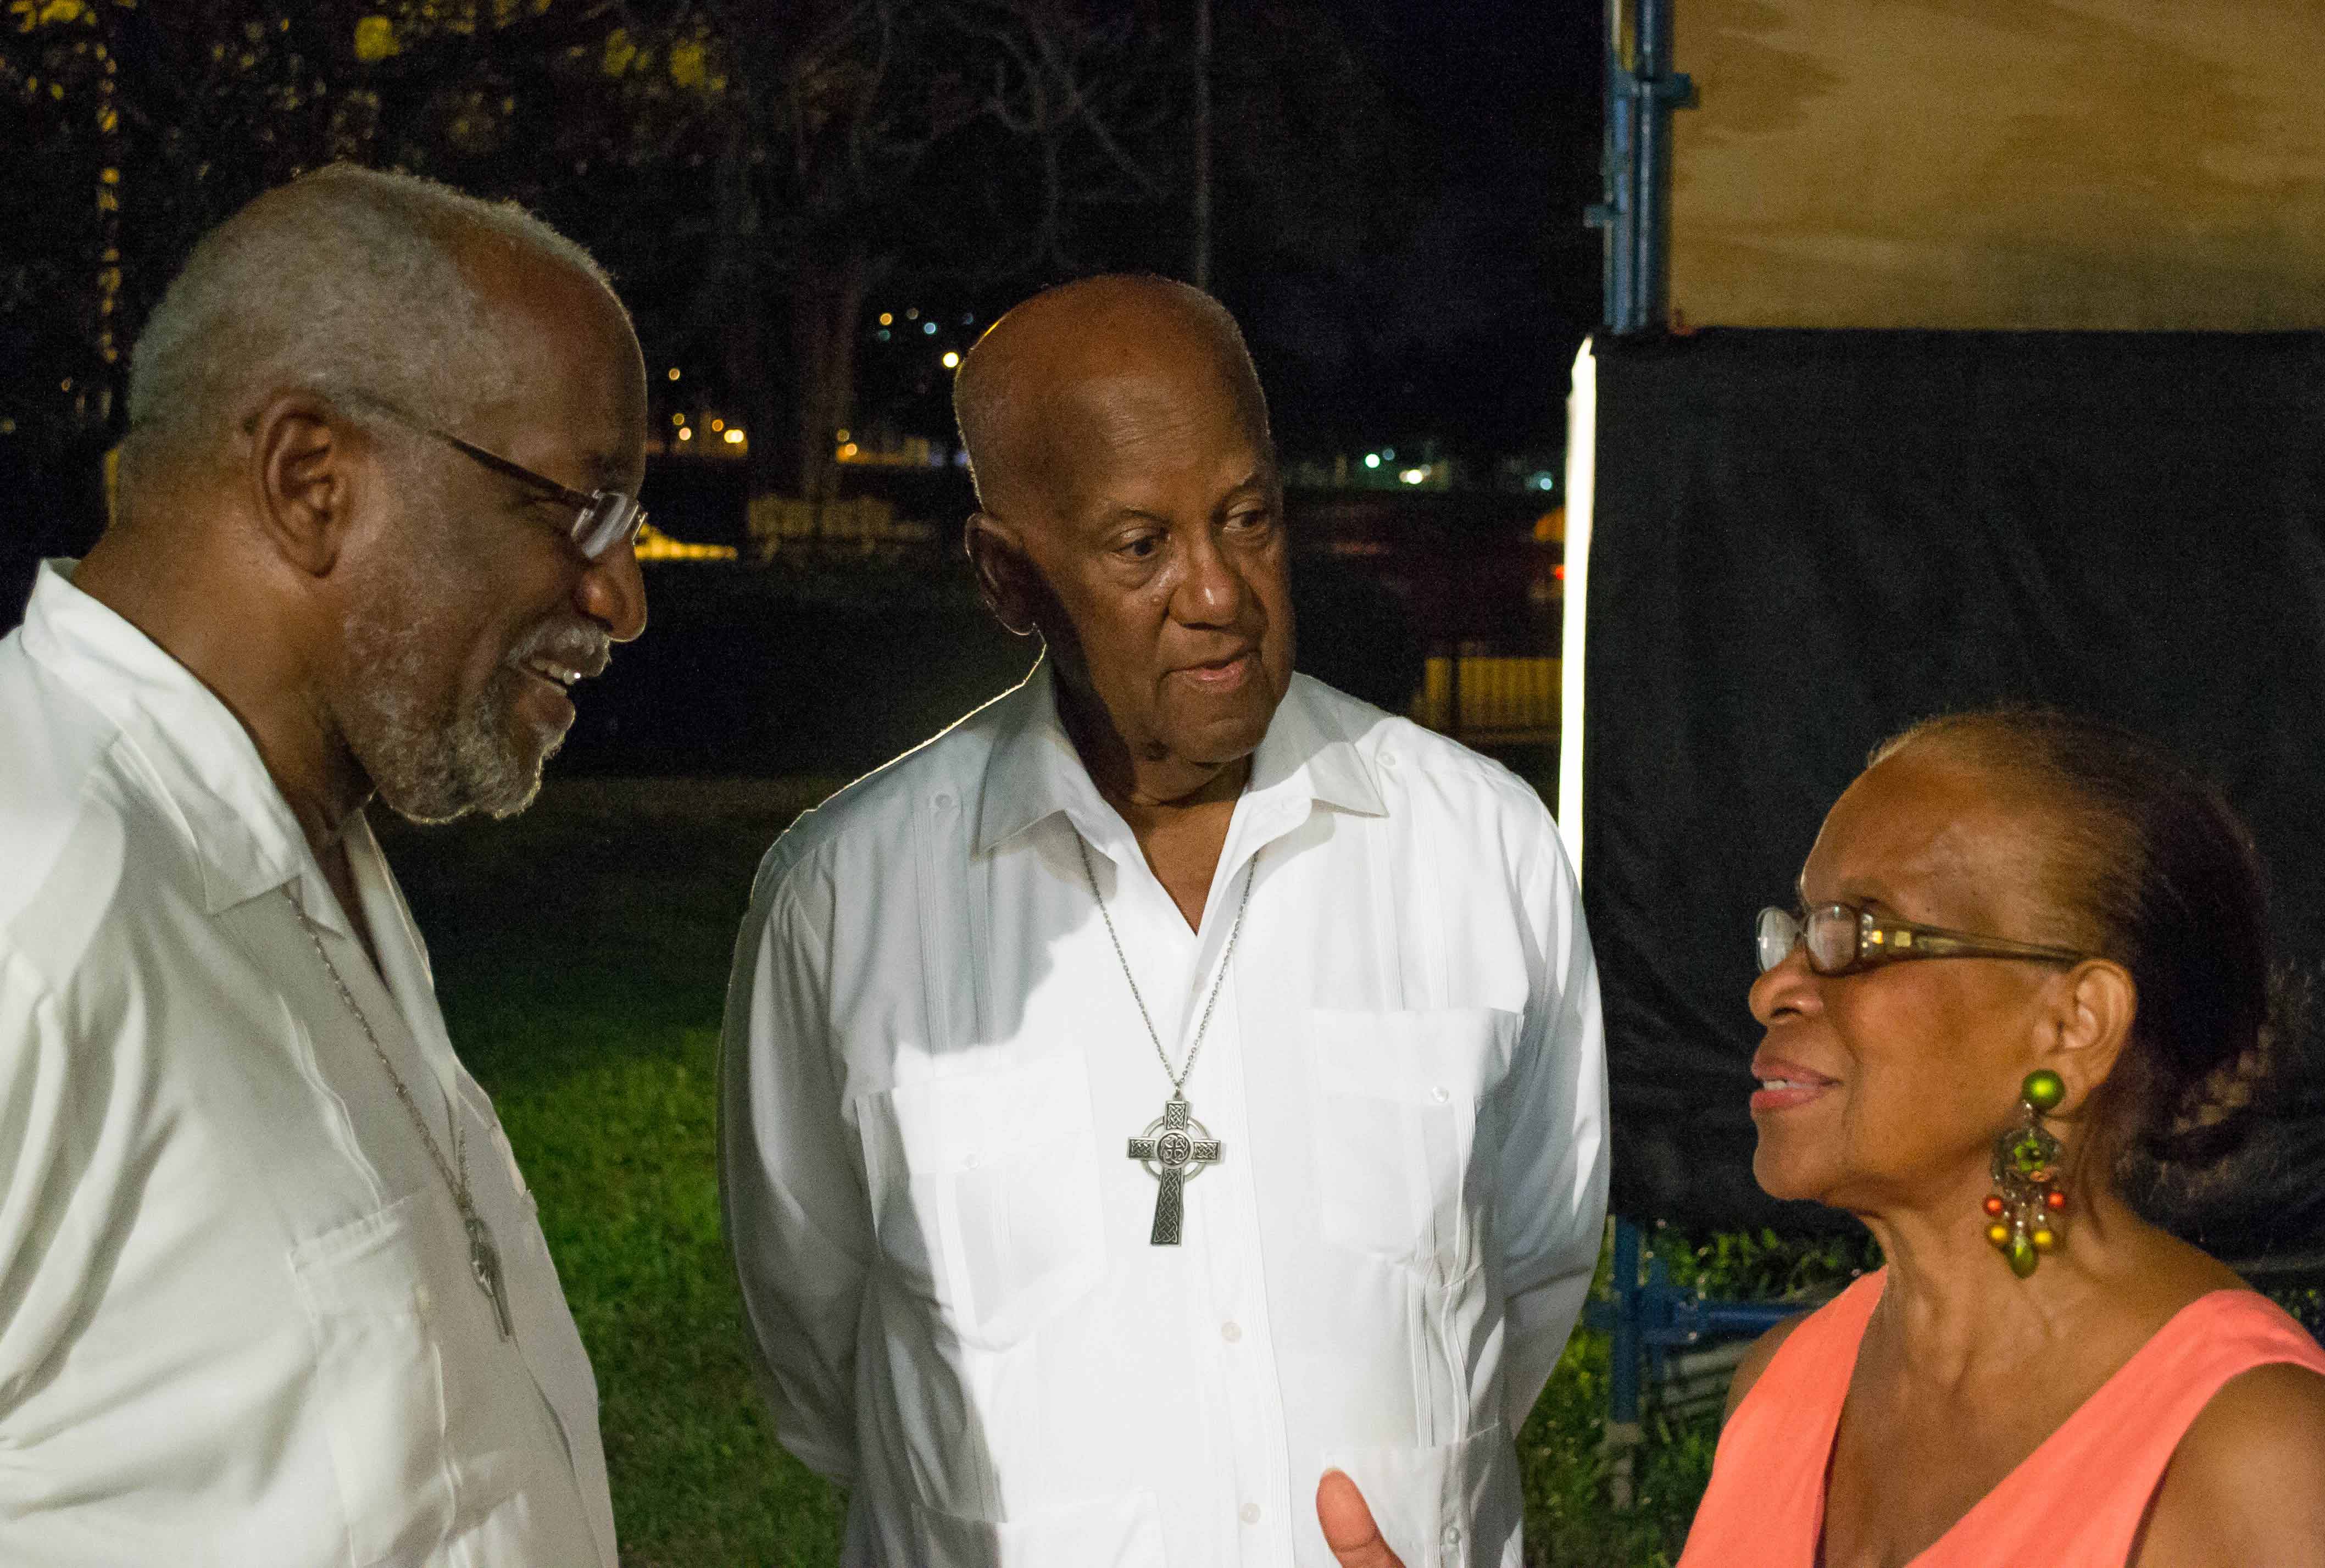 From left to right: Canon, Dr. Steve West; retired Bishop, the Rt. Reverend Rawle Douglin; and supporter of the church, Joy Dumas.